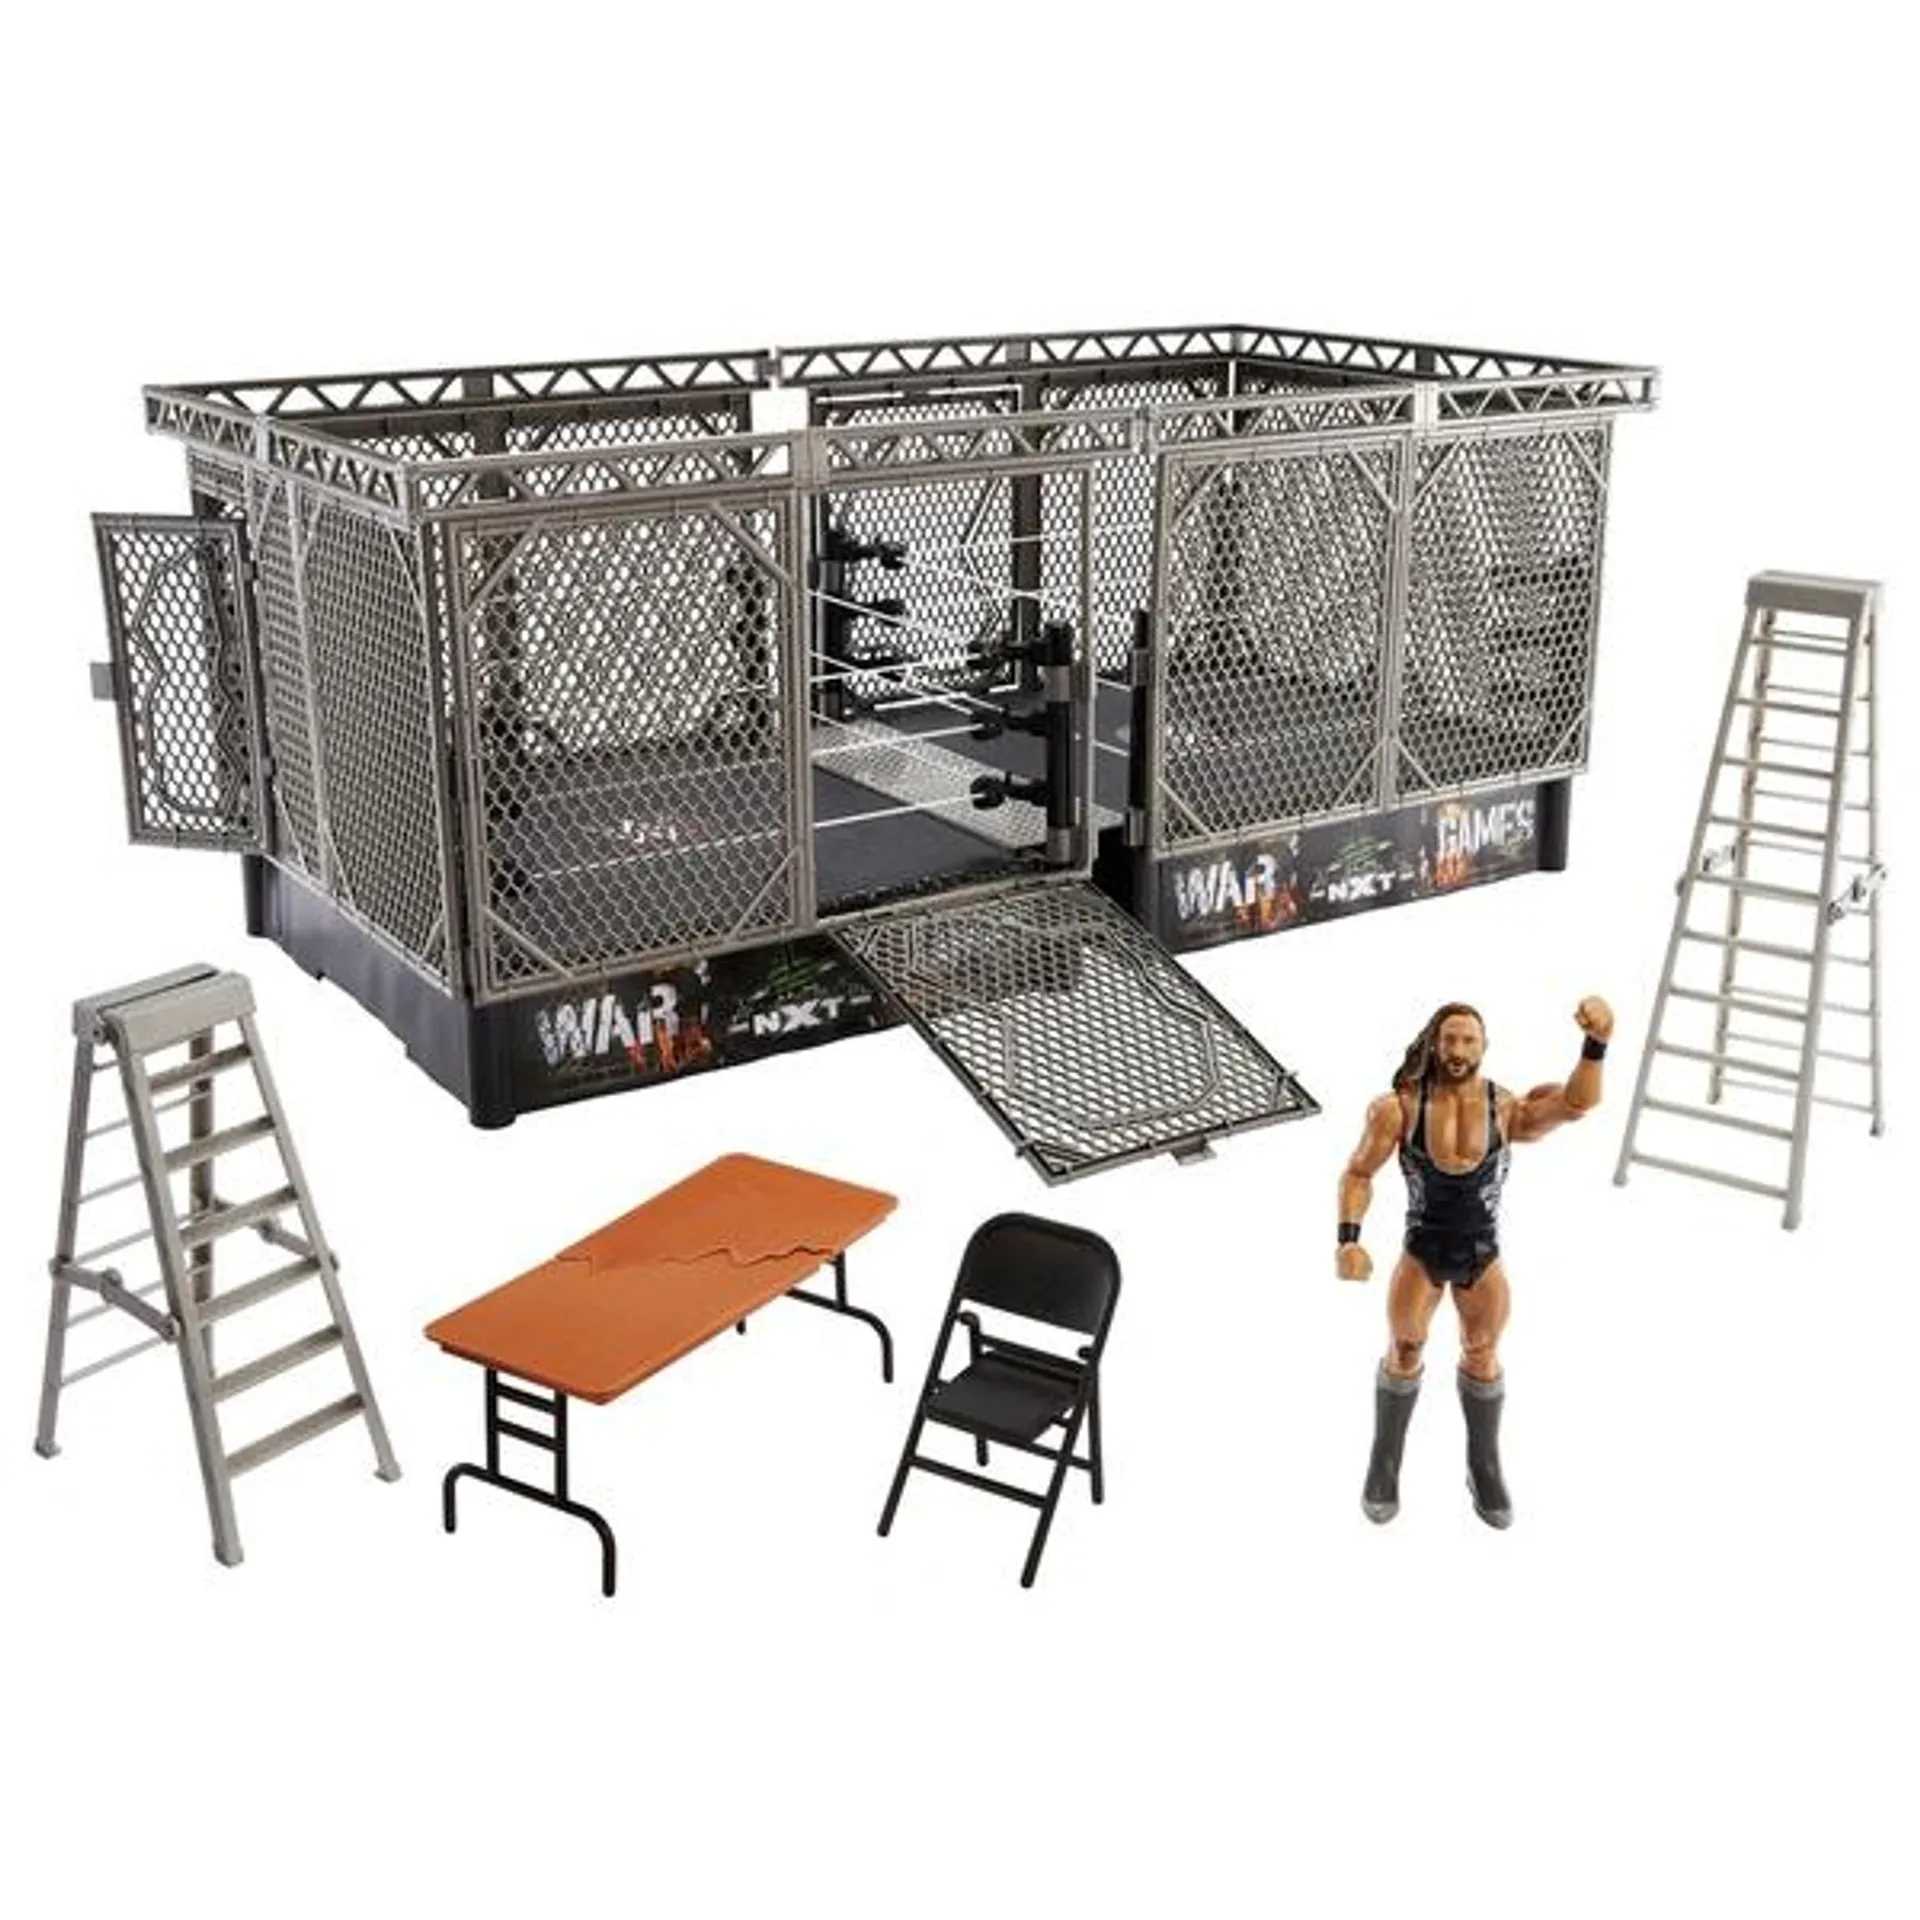 WWE NXT TakeOver War Games Playset with Pete Dunne action figure